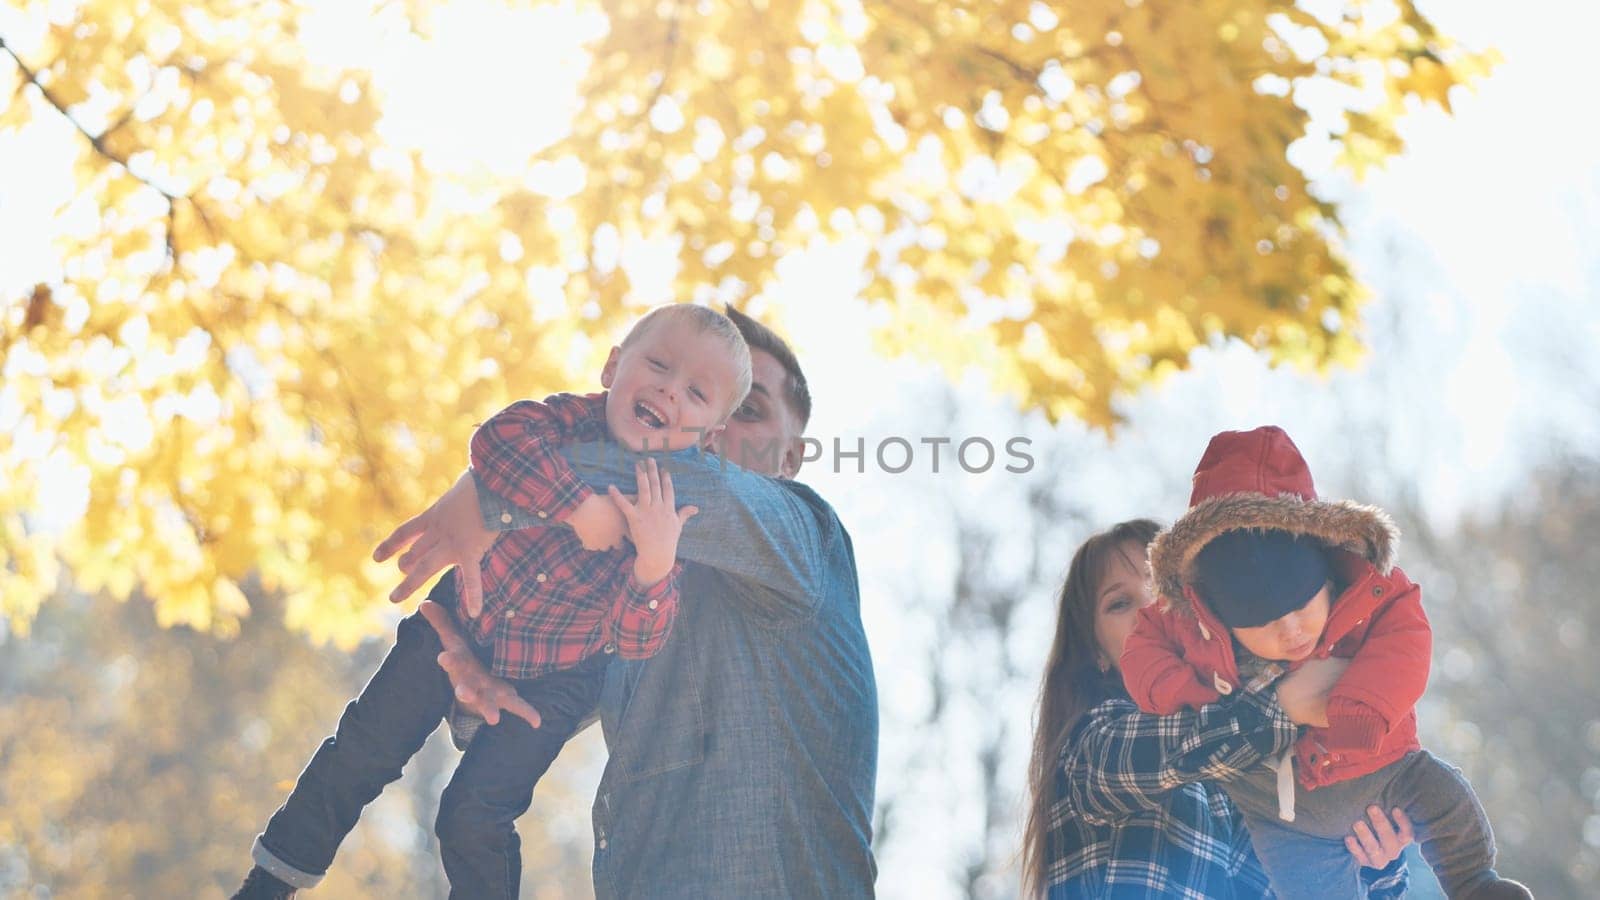 A young, fun family playing with their children in the park in the fall. by DovidPro